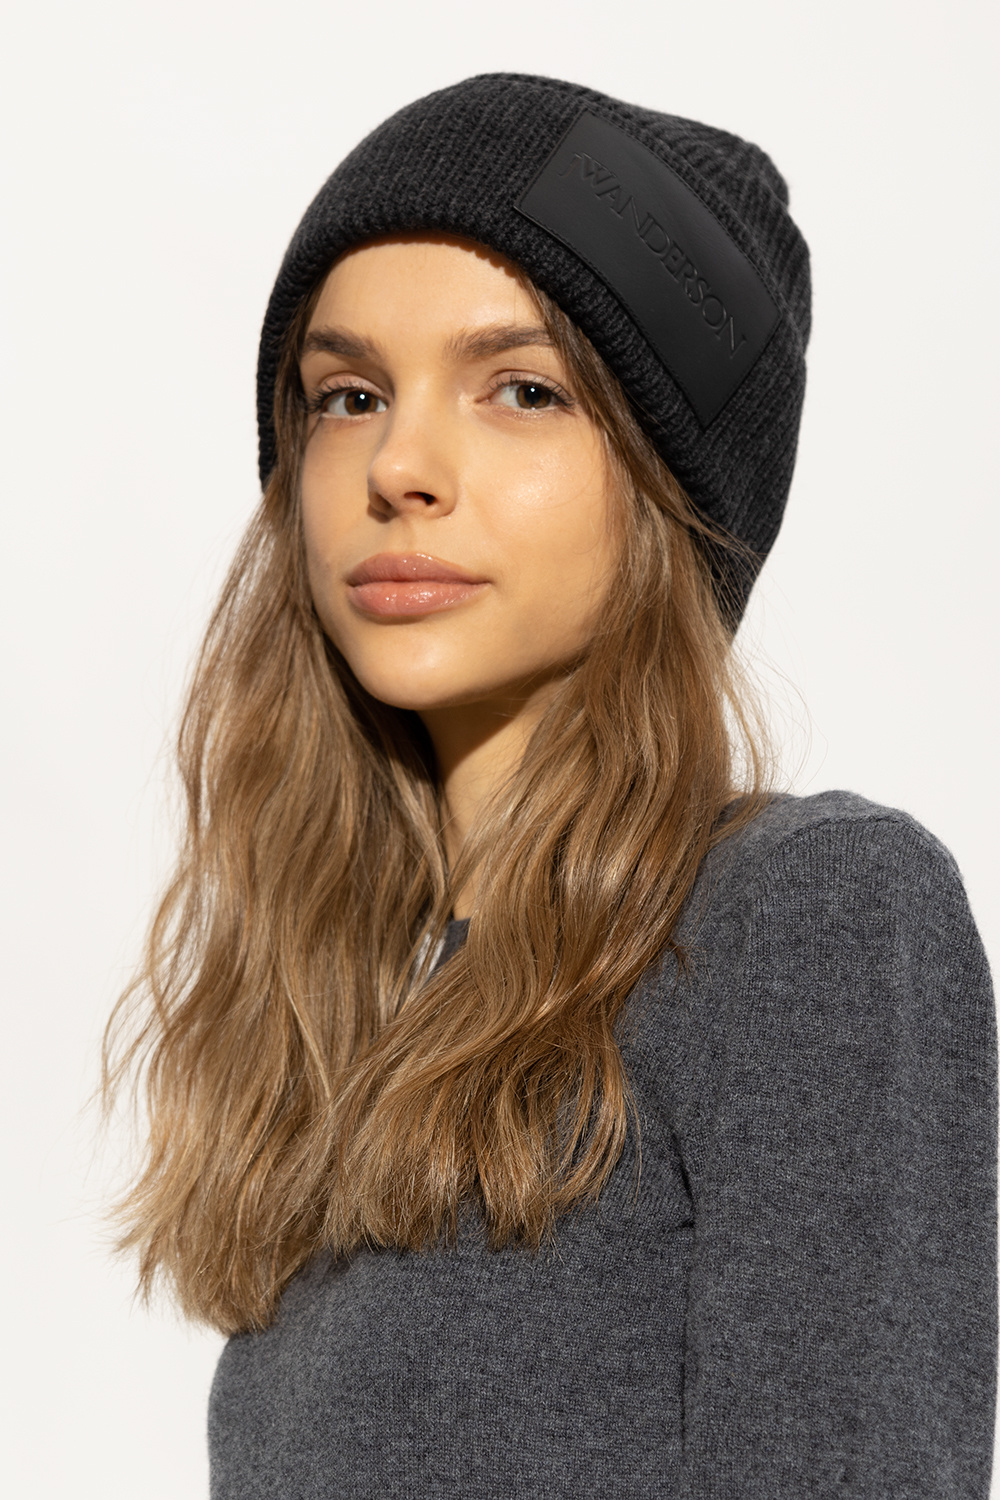 JW Anderson ALLSAINTS KNITTED HAT